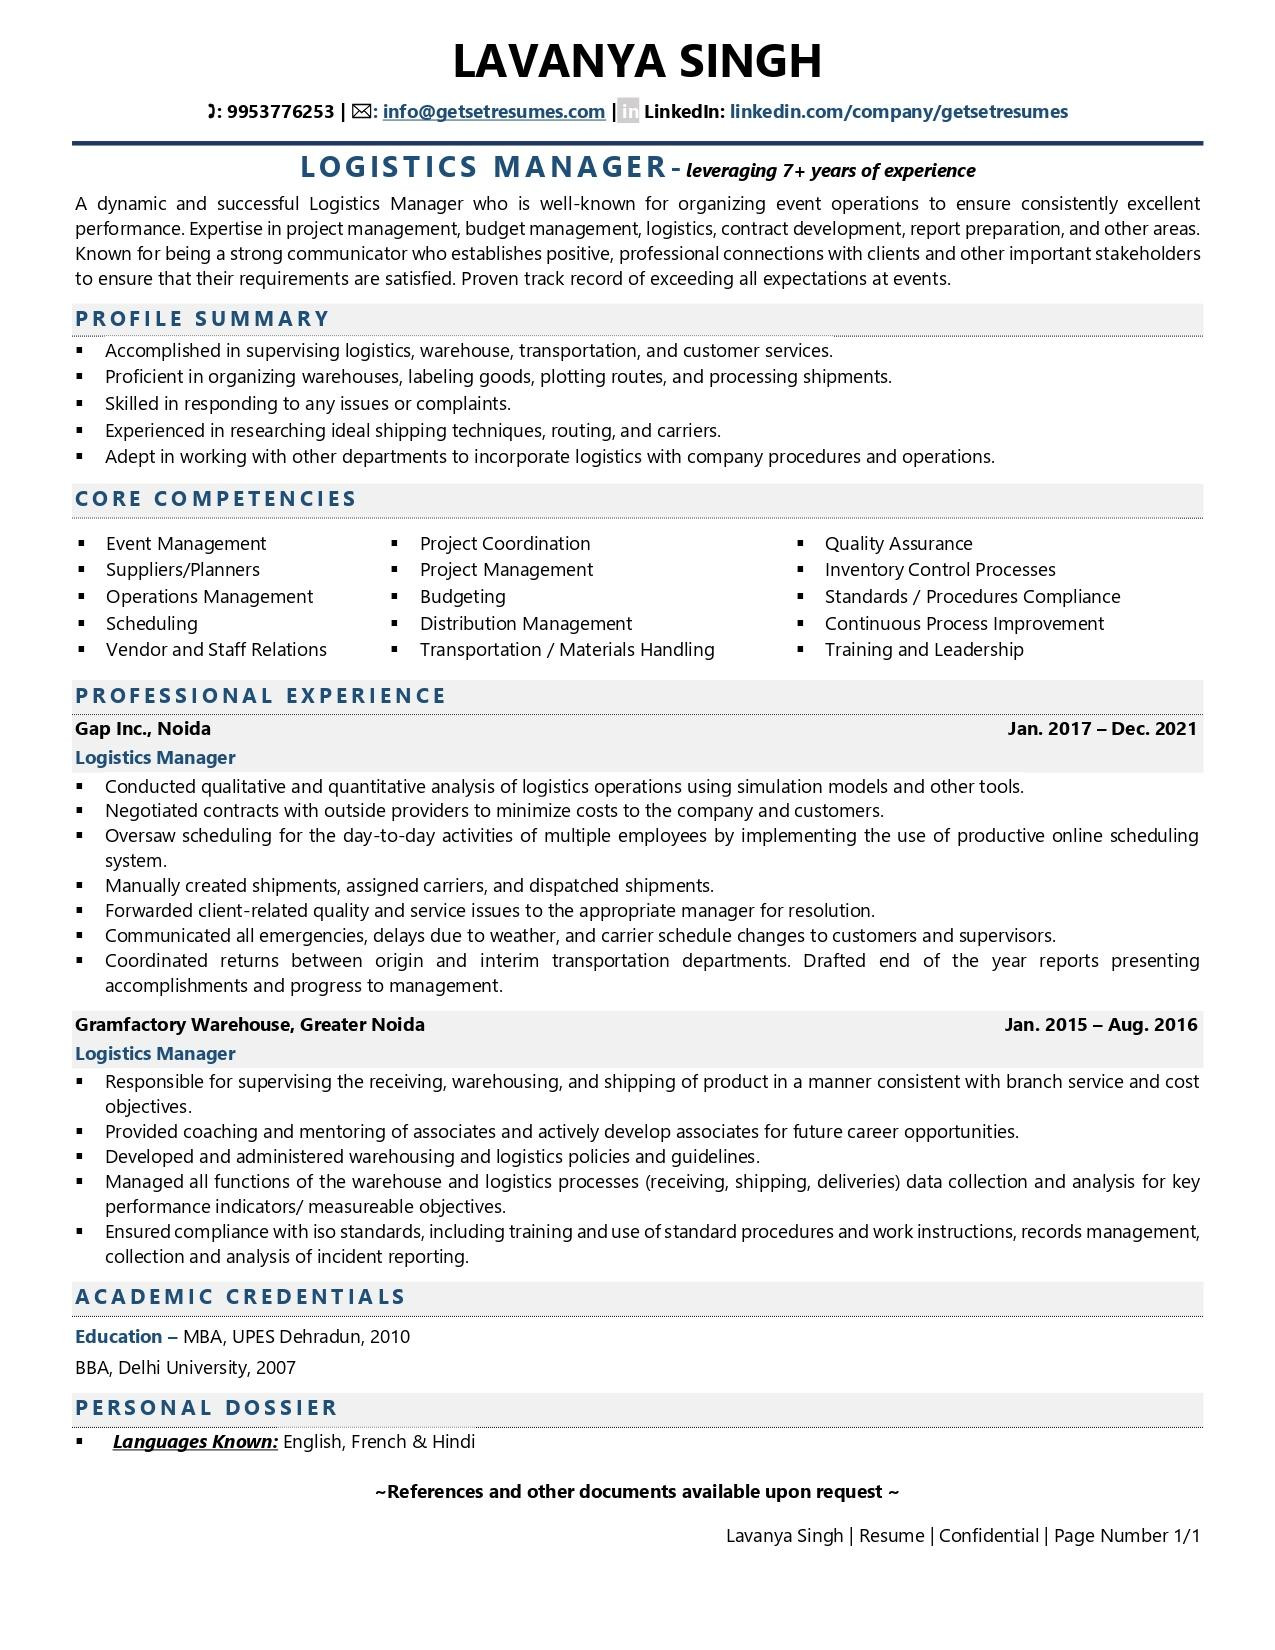 Sample Resume for Trucking Operations Manager Logistics Manager Resume Examples & Template (with Job Winning Tips)